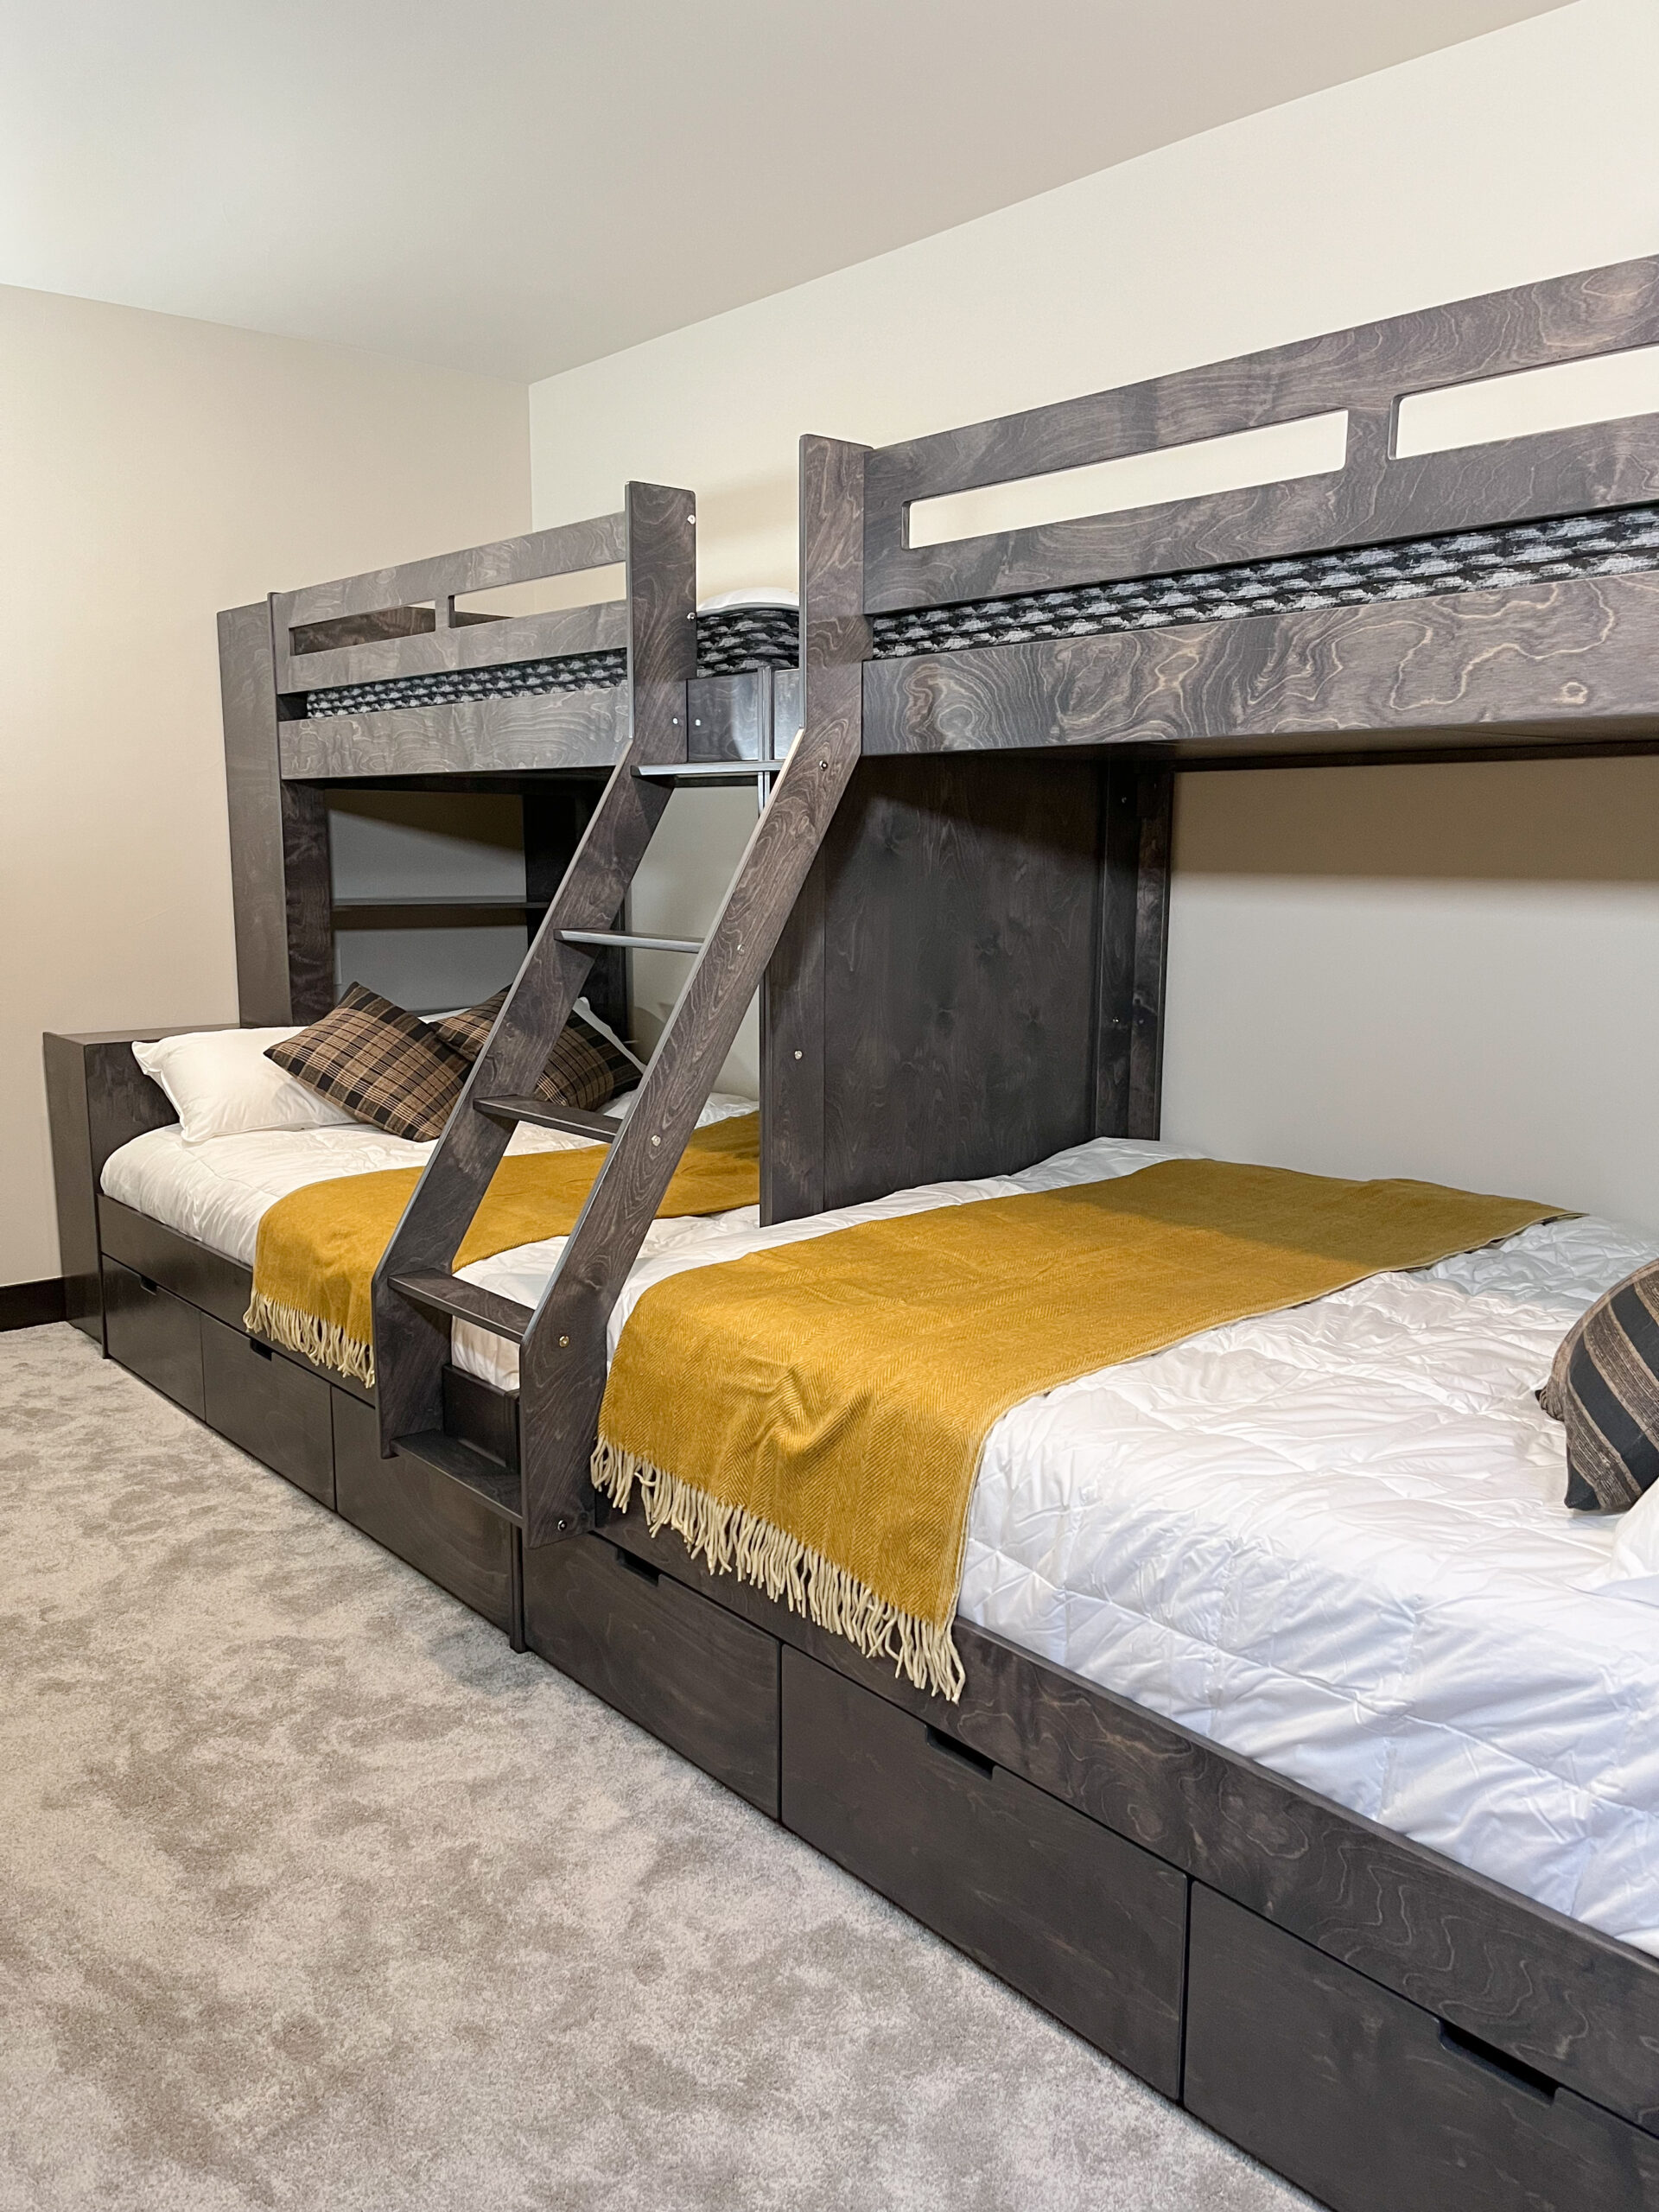 a grey stained beautiful bunk room set. the stain shows the grain so beautiful. with us you can order a bed like this online.